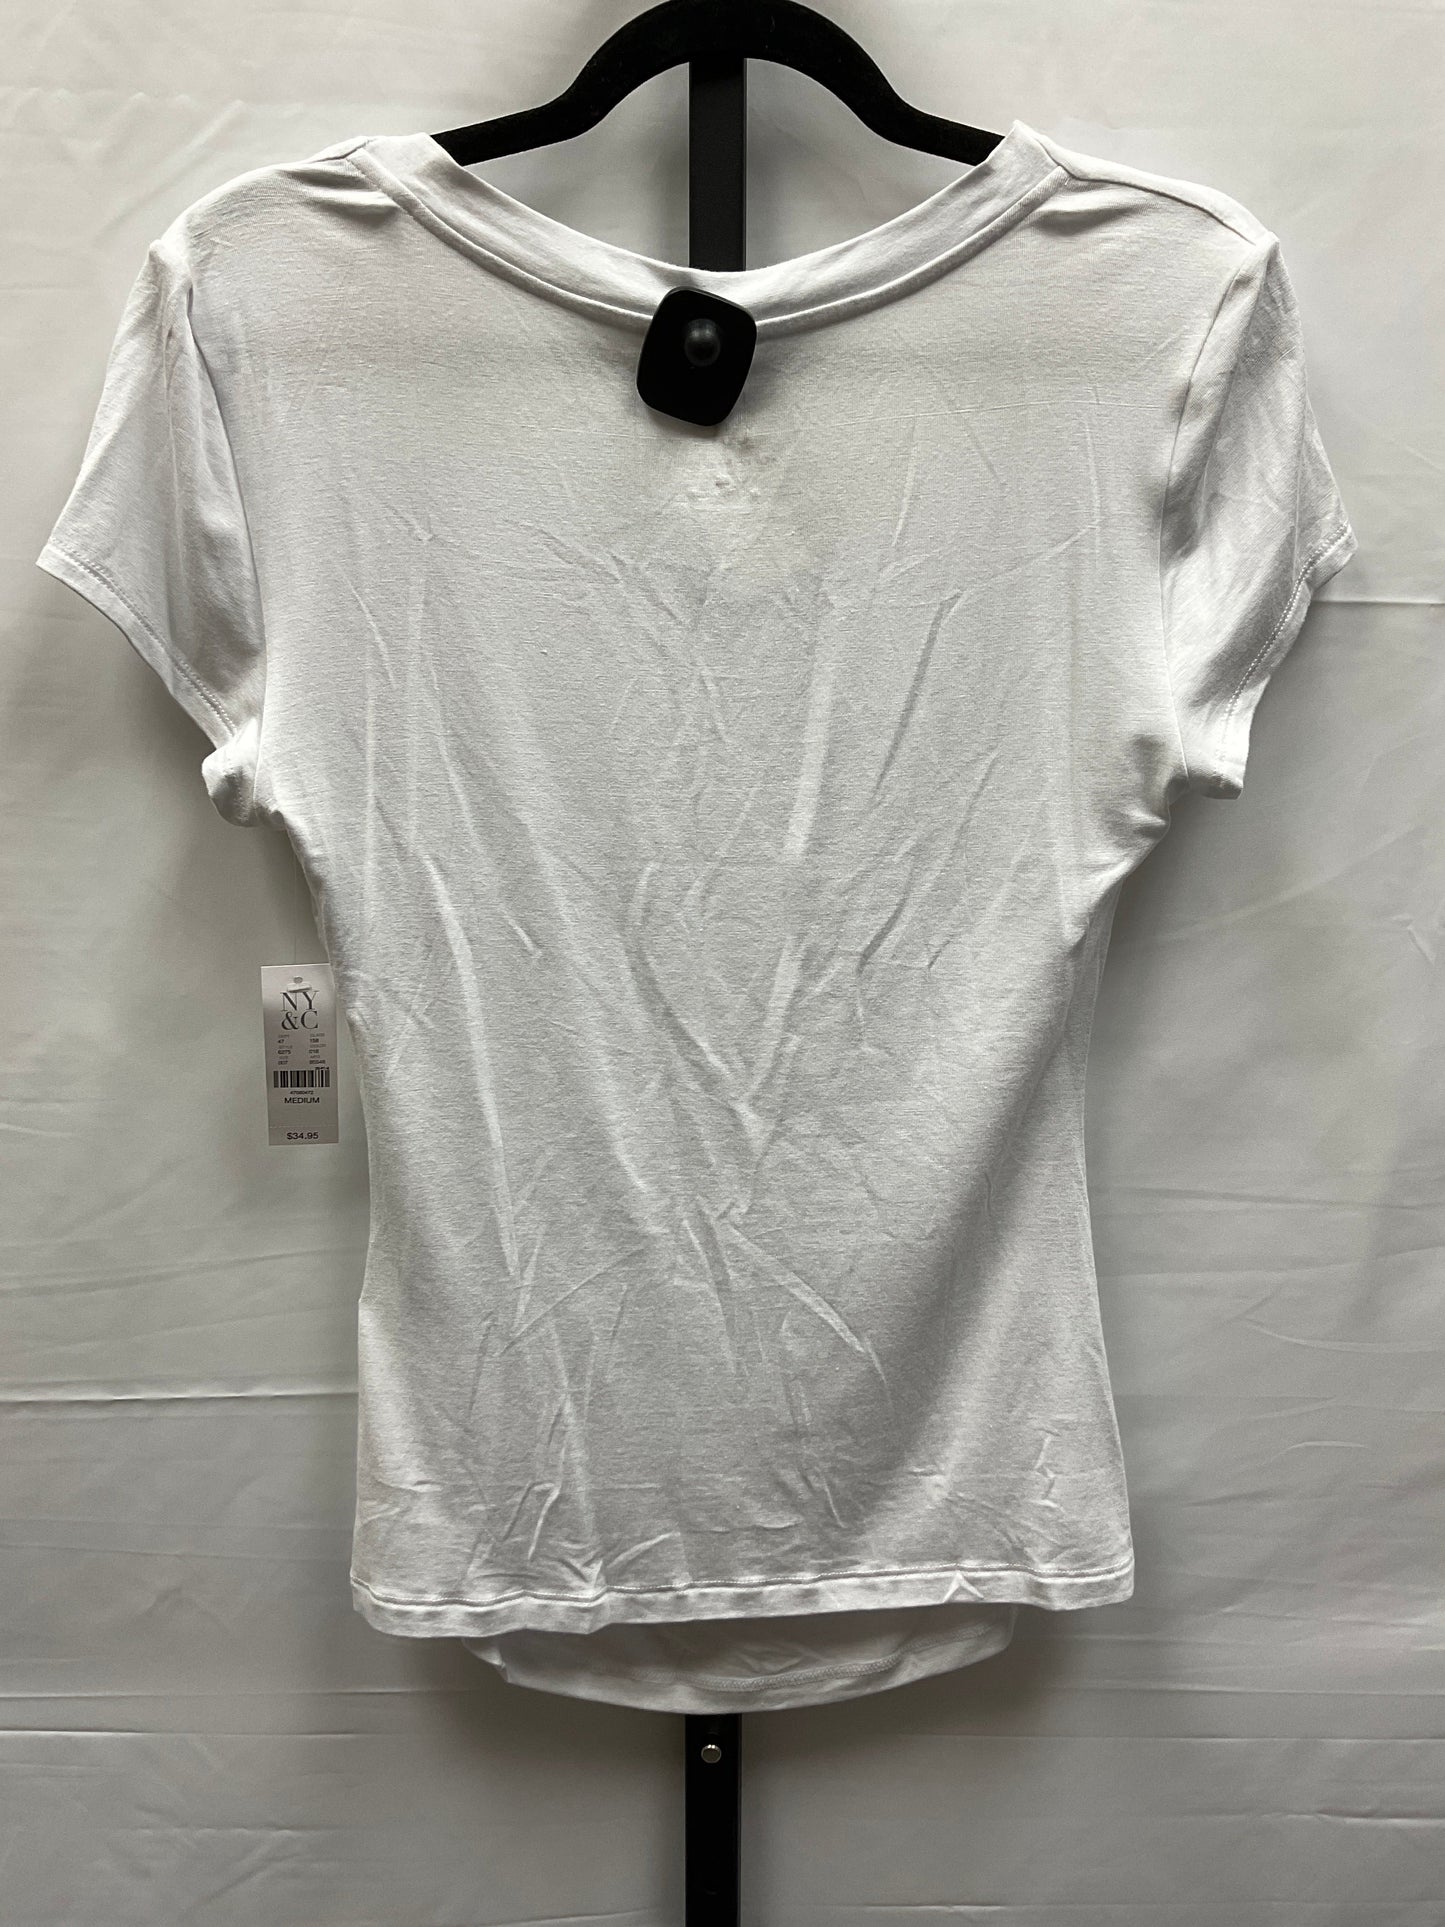 White Top Short Sleeve New York And Co, Size M